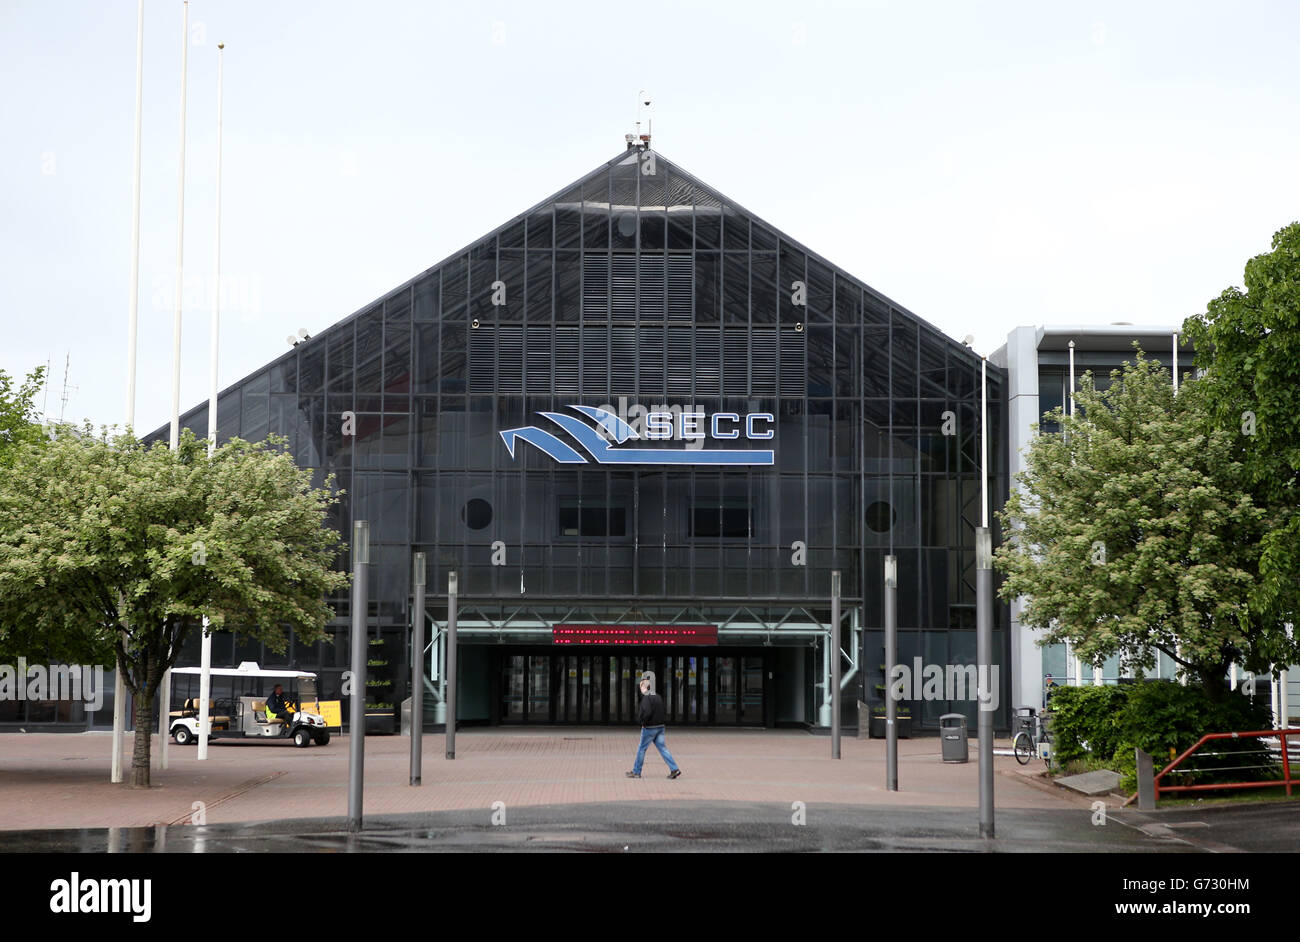 A general view of the SECC in Glasgow which is a Commonwealth Games Venue. PRESS ASSOCIATION Photo. Picture date: Wednesday May 28, 2014. See PA story SPORT Scotland. Photo credit should read: Andrew Milligan/PA Wire Stock Photo